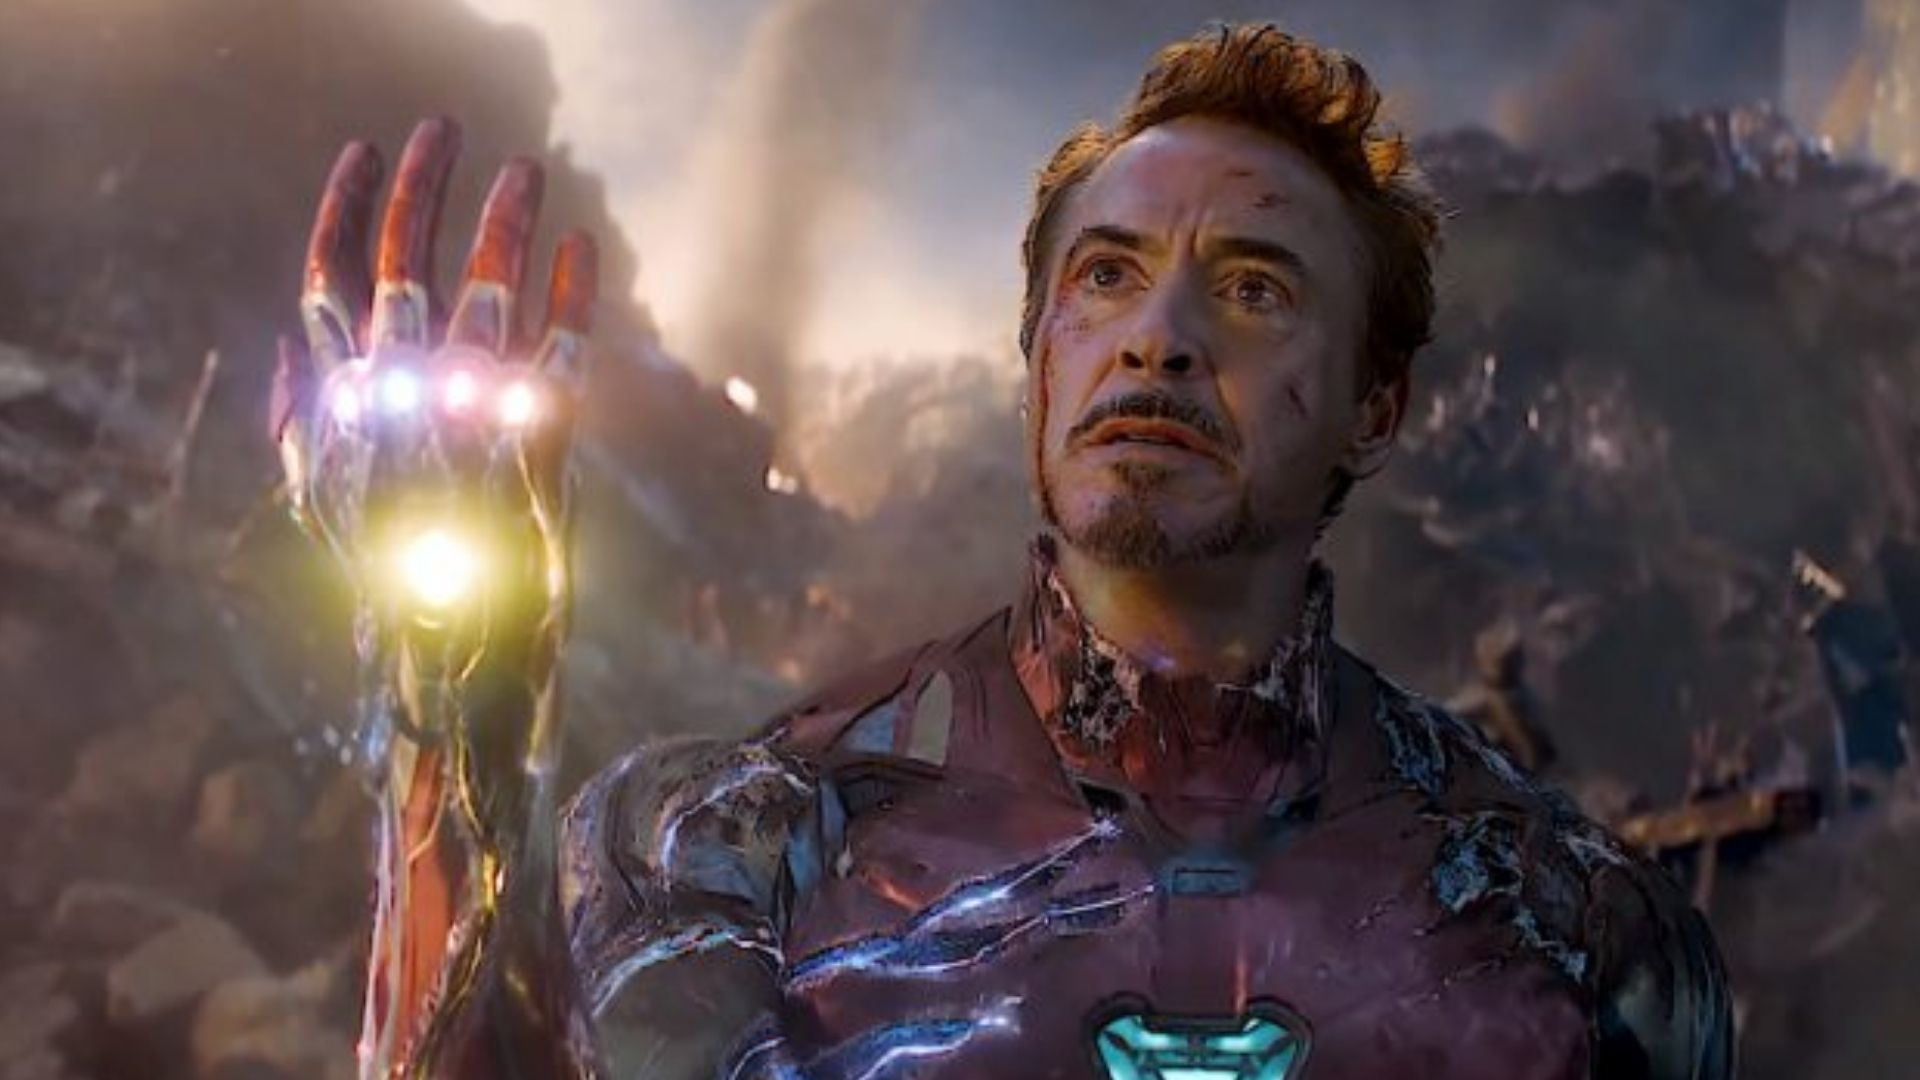 Tony about to snap his fingers in Avengers: Endgame.